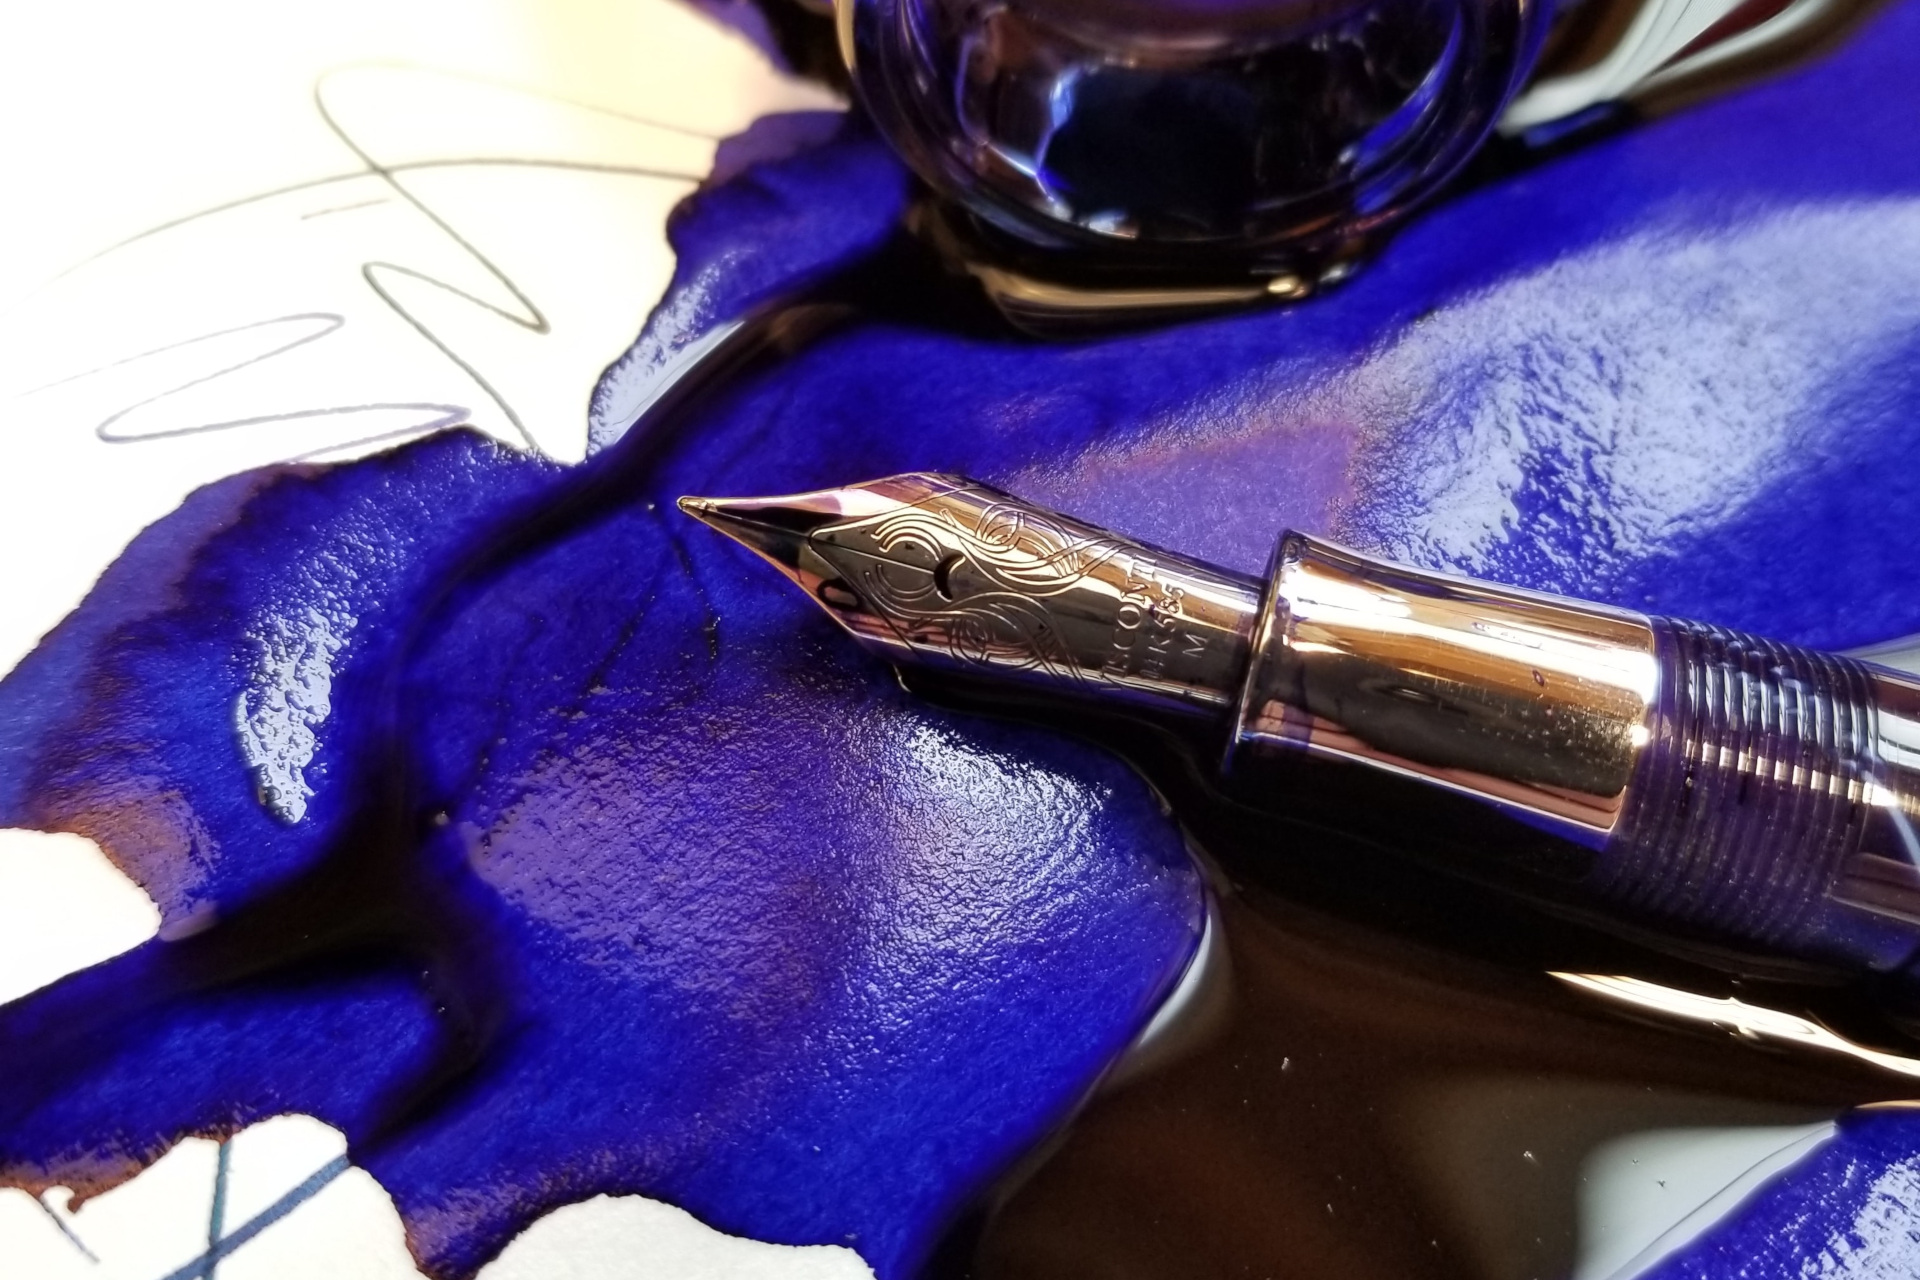 Fountain pen on top of spilled ink